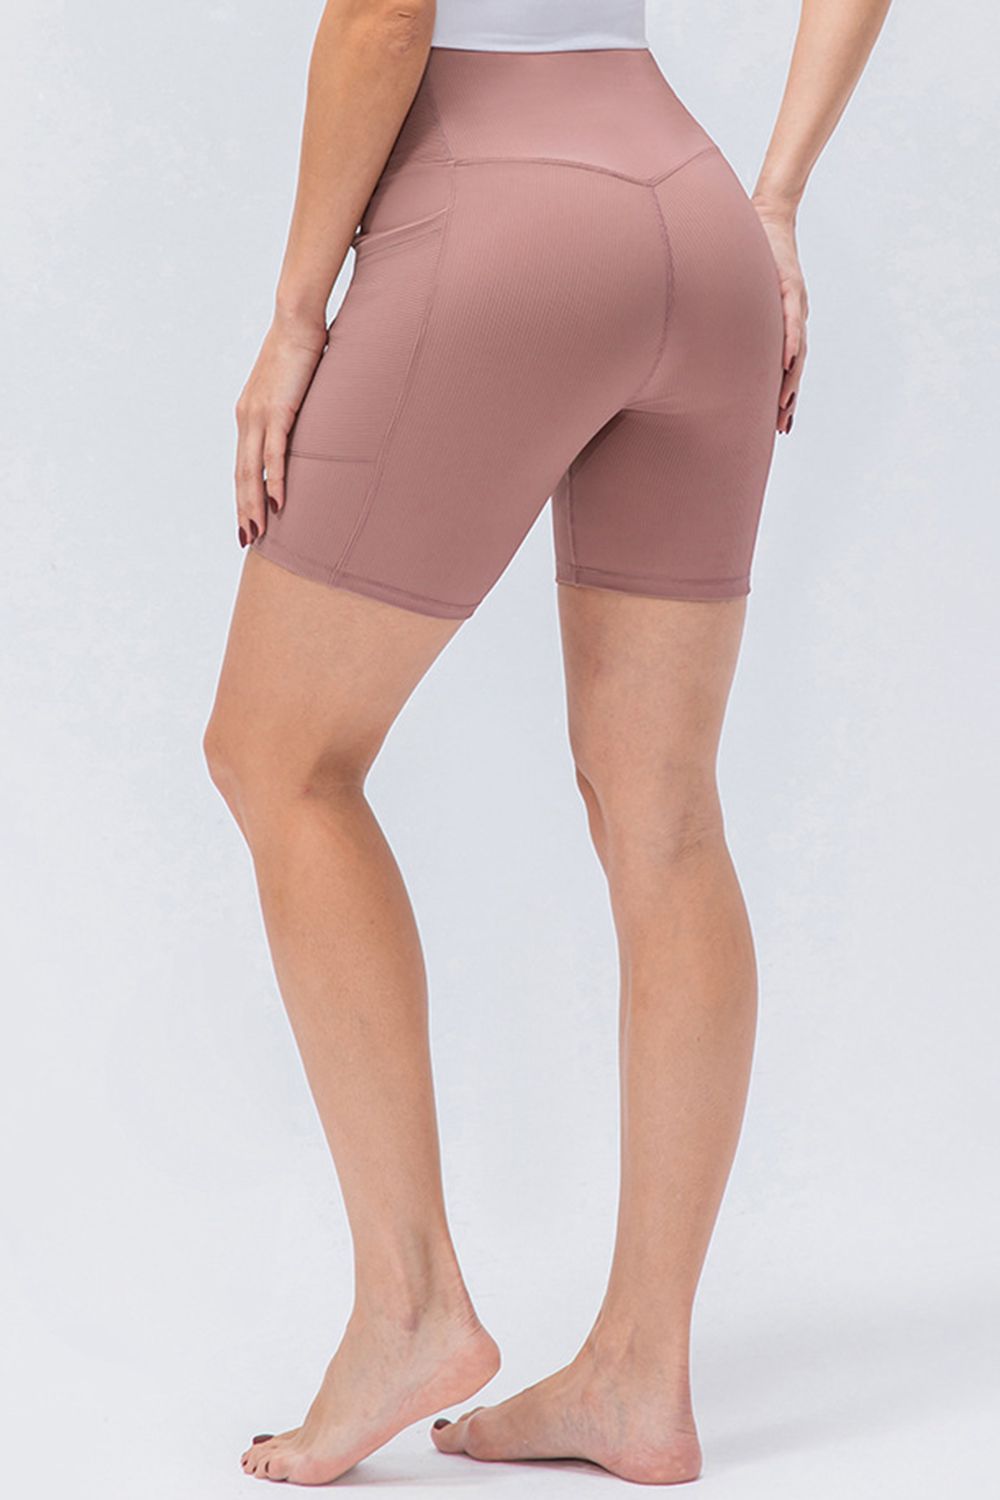 Slim Fit V-Waistband Sports Shorts - A Better You